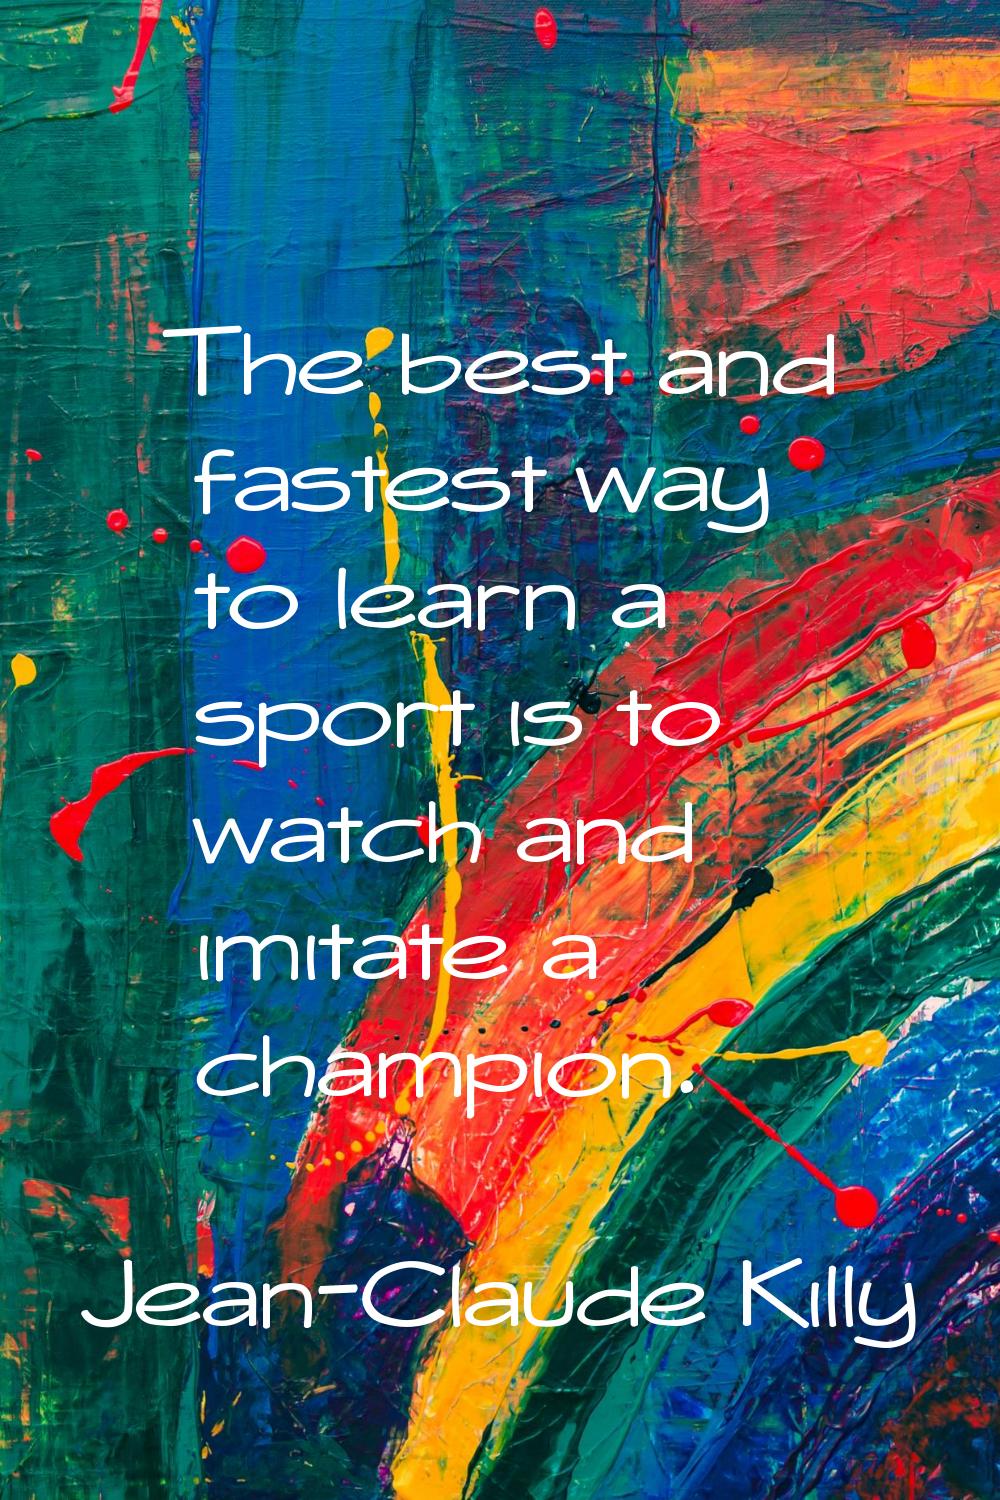 The best and fastest way to learn a sport is to watch and imitate a champion.